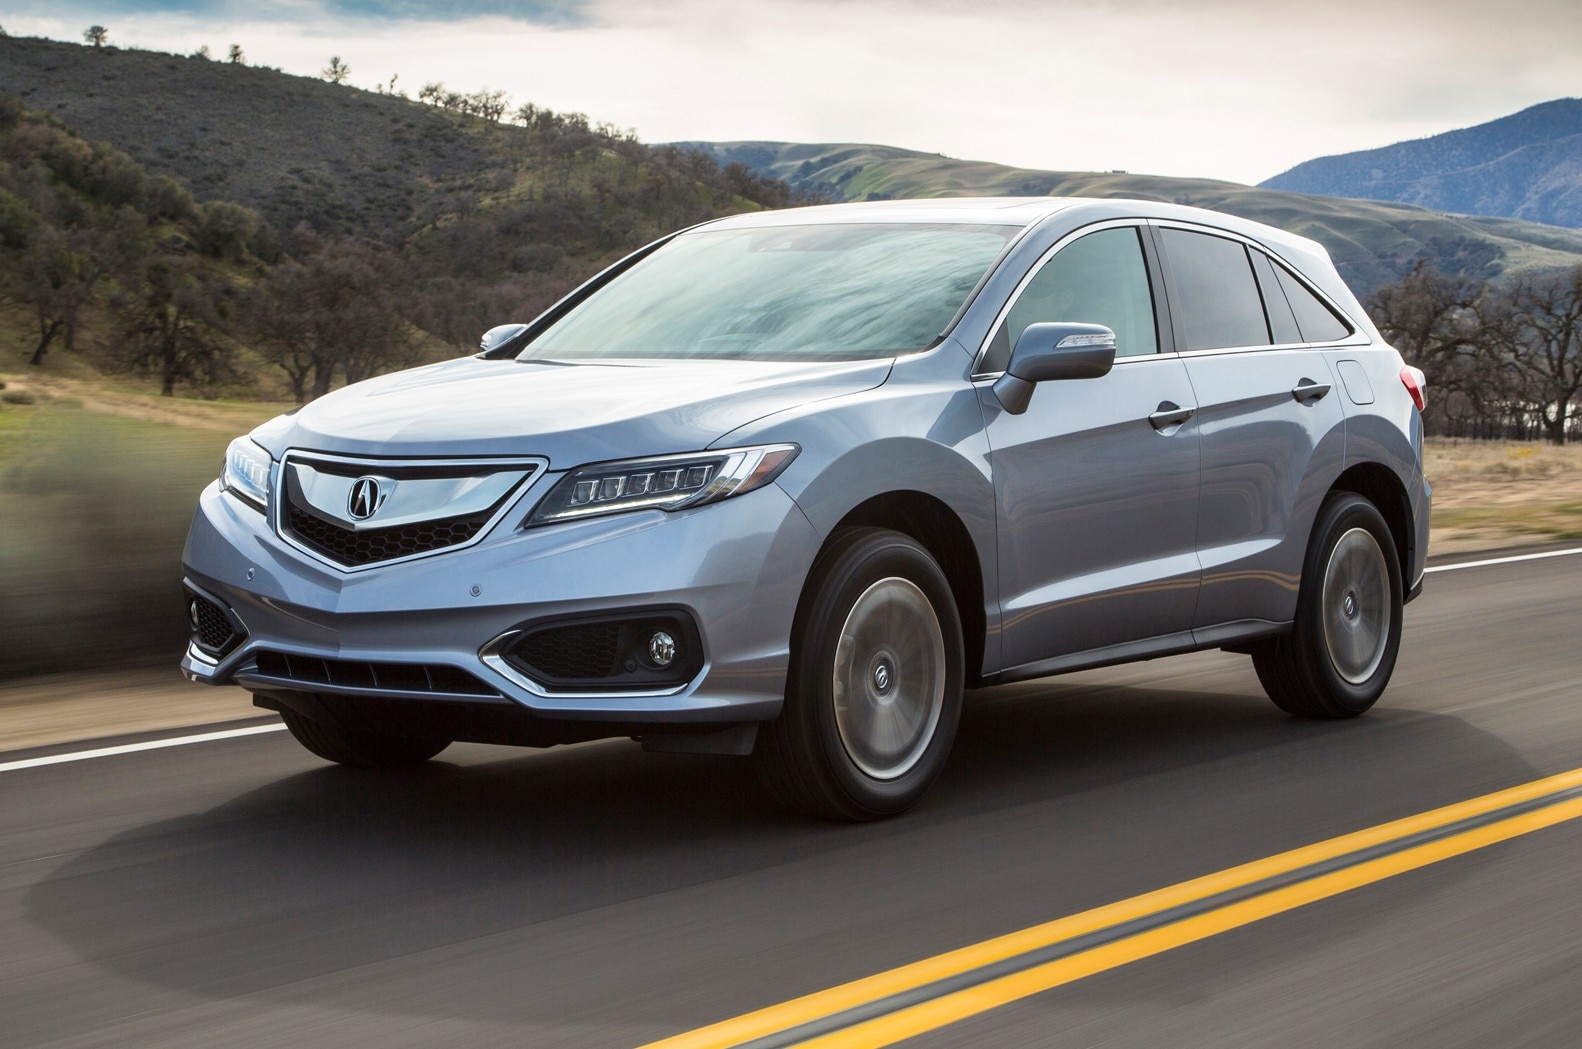 2016 Acura RDX AWD First Test Review